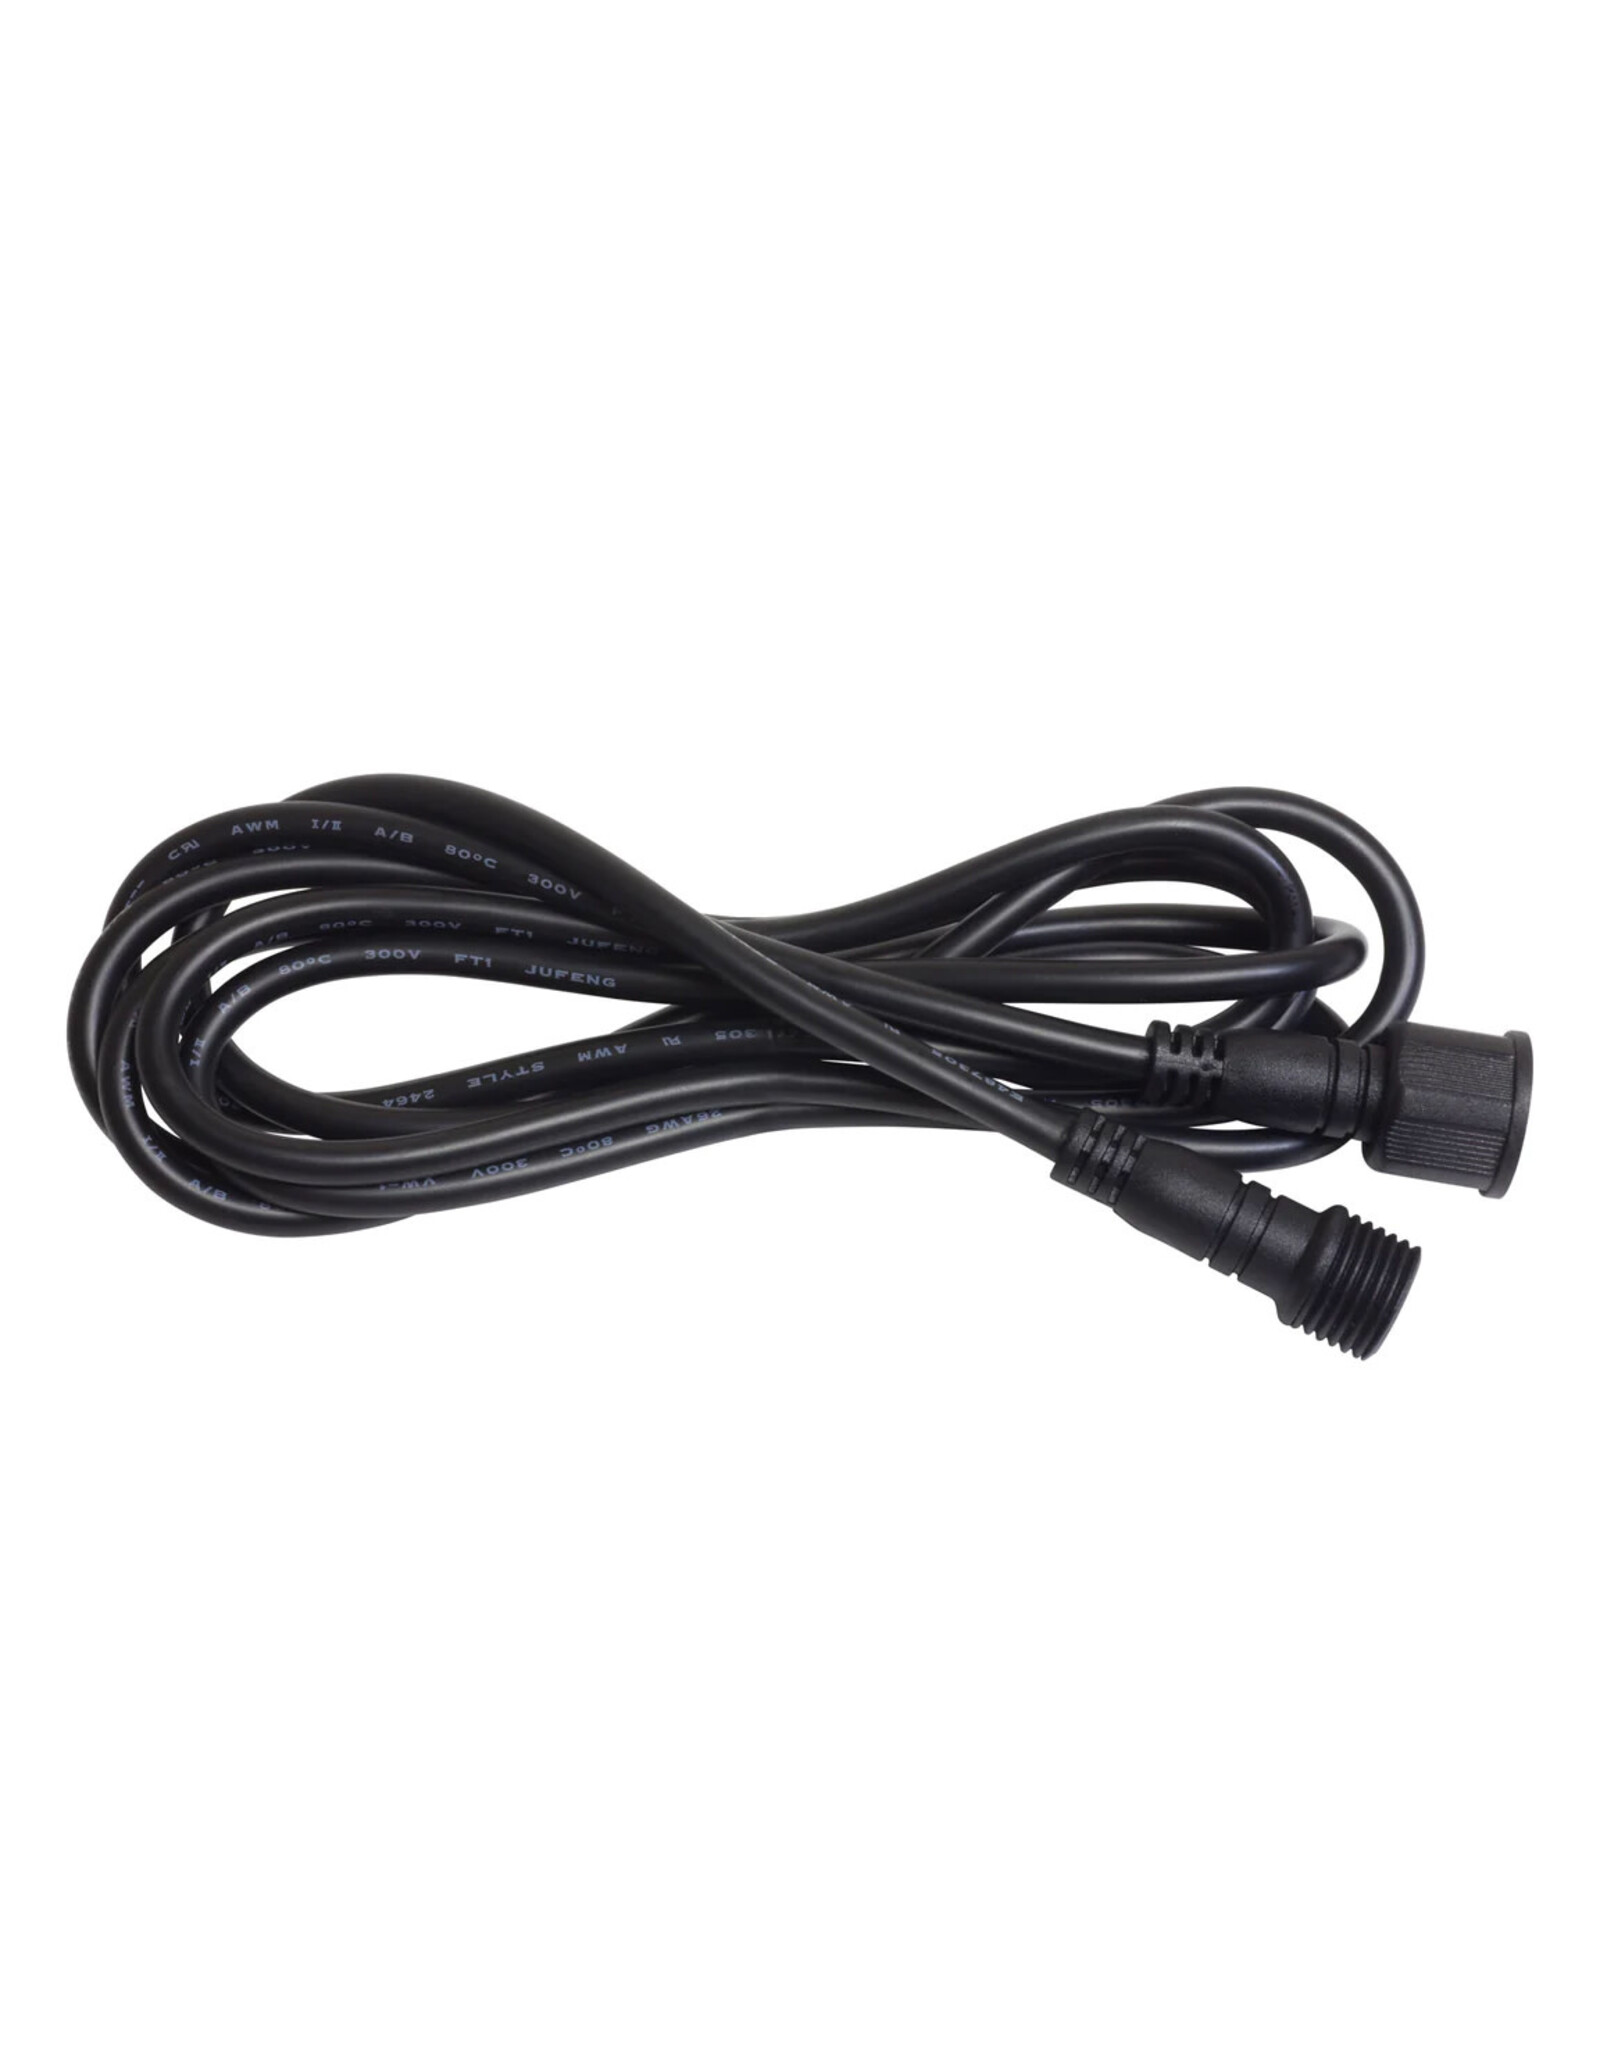 Yak-Power Yak-Power 6ft Control Cable Extension